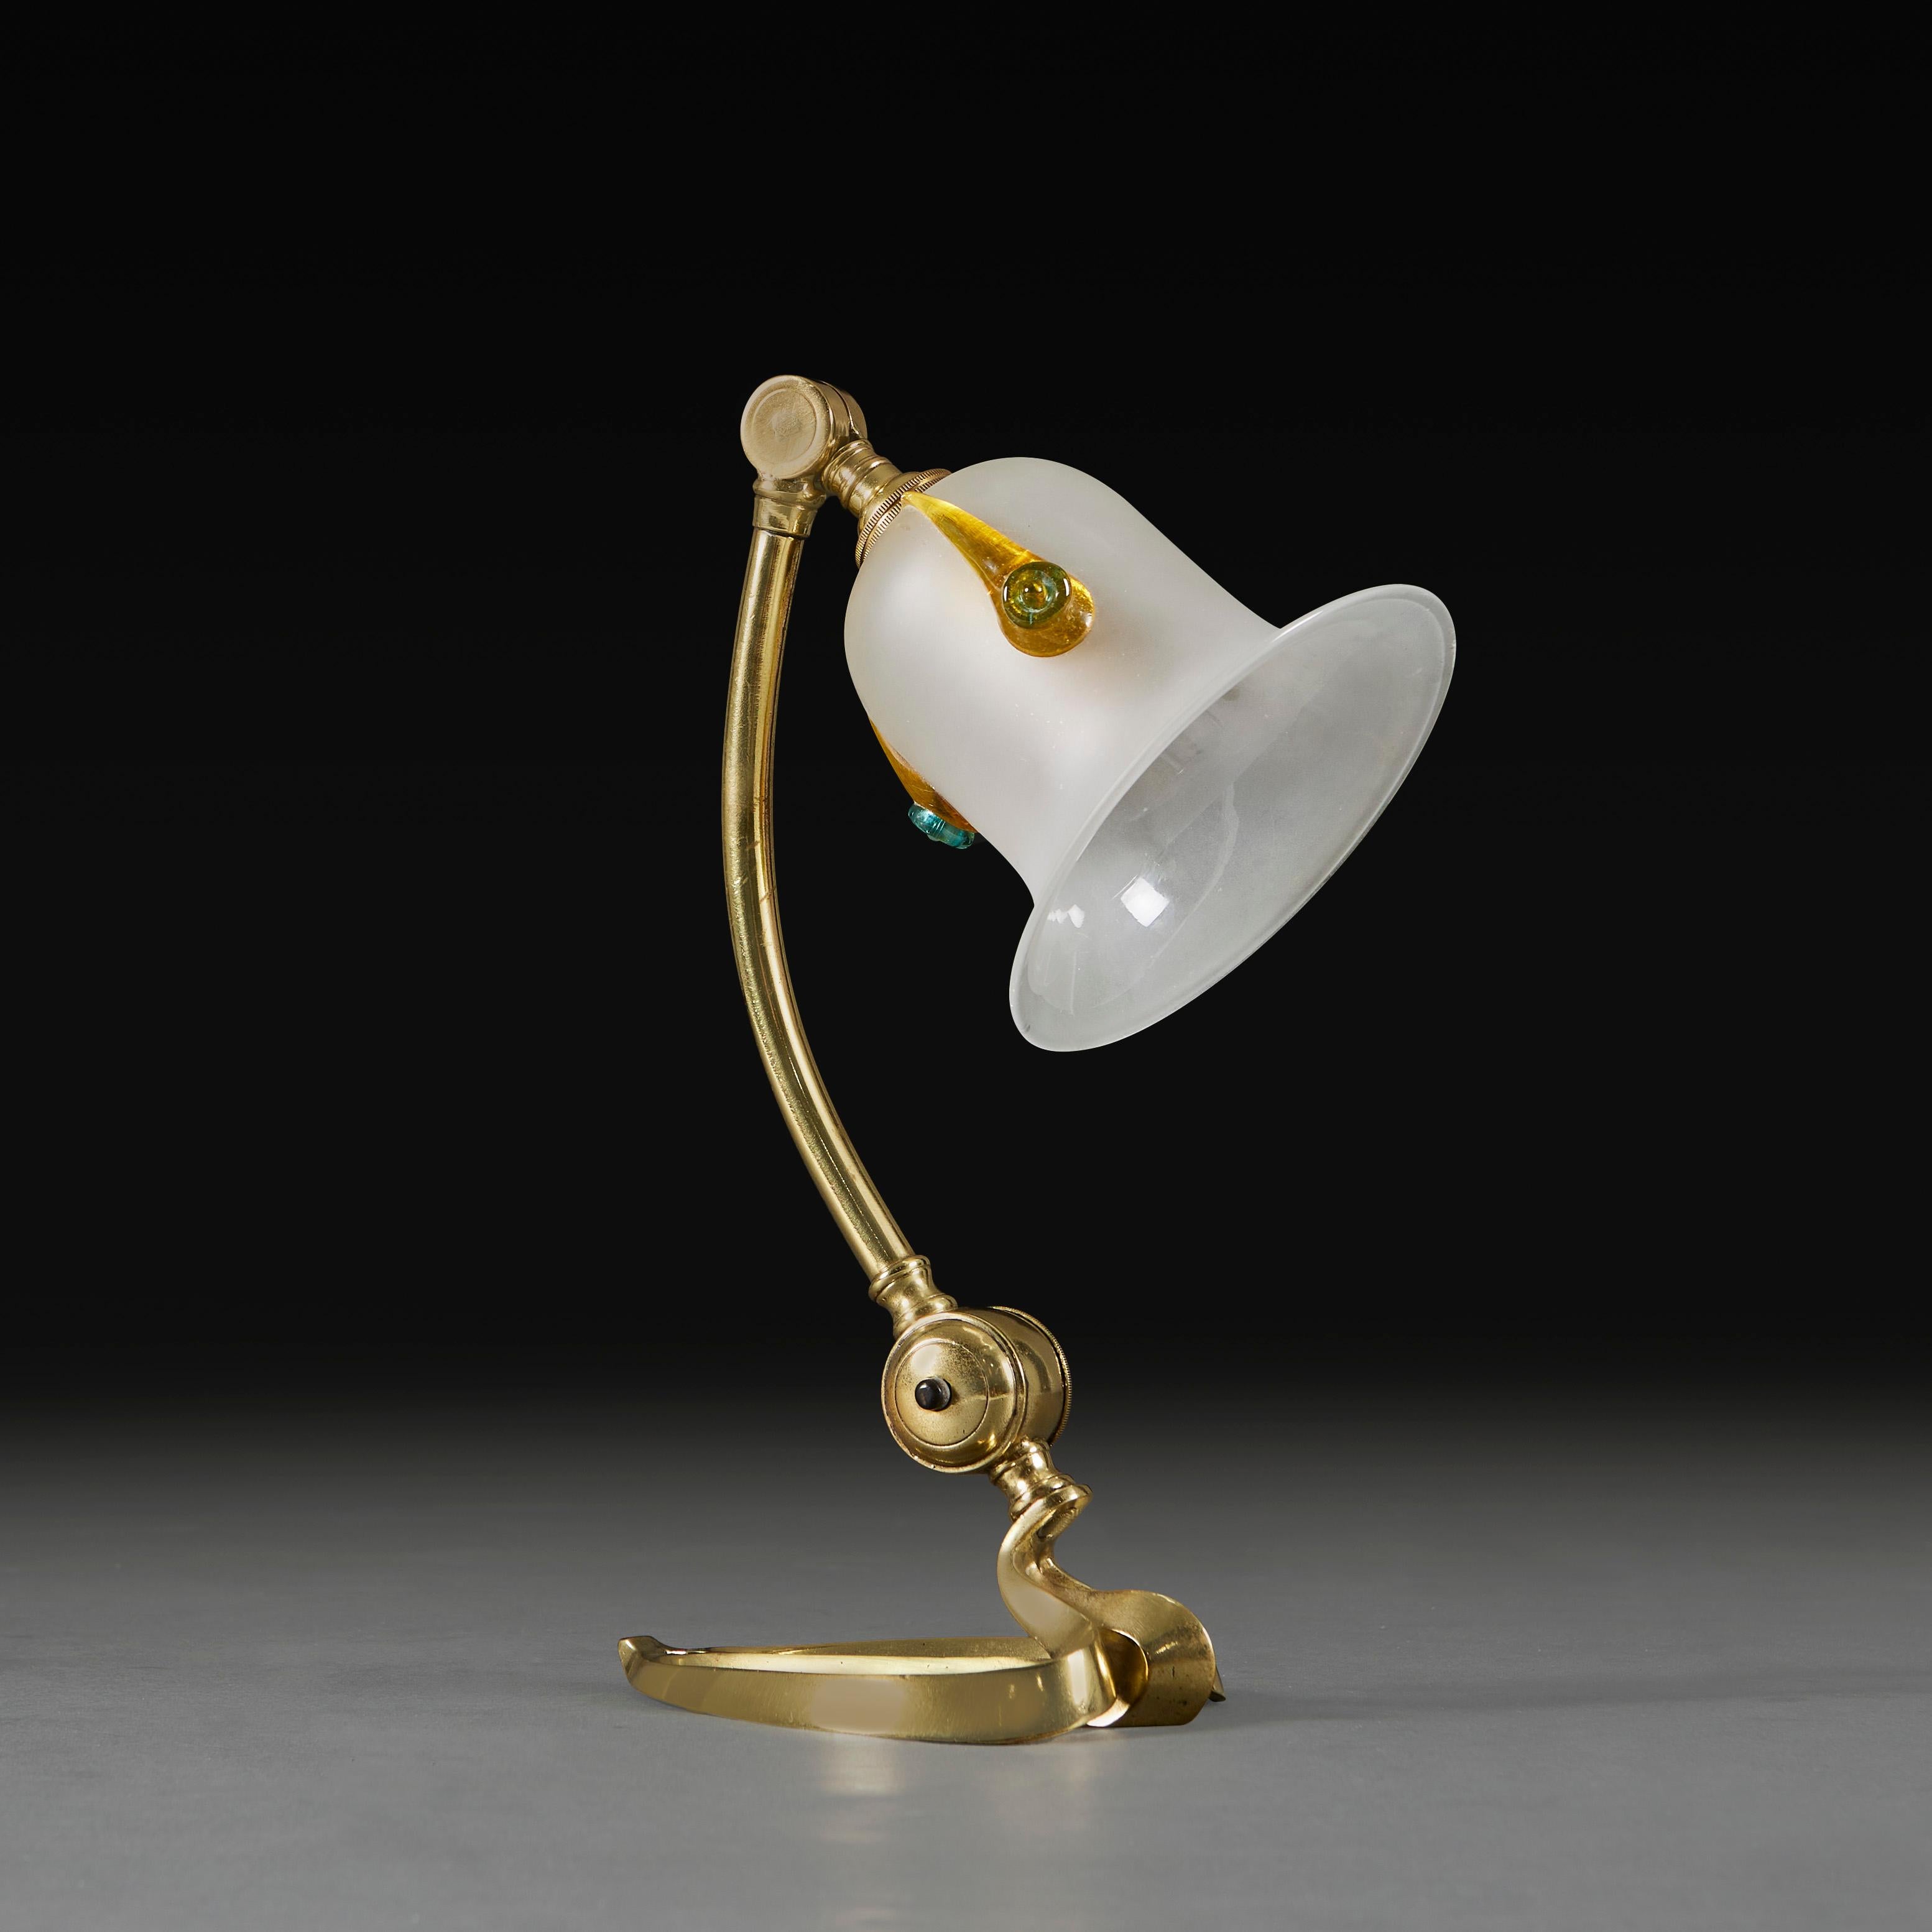 England, circa 1900

An articulated brass lamp with heart shaped base, with brass screw to the neck, to be used as a desk lamp or mounted on the wall. Attributed to W.A.S Benson. 

Please note: This is currently wired for the UK with BC bulb